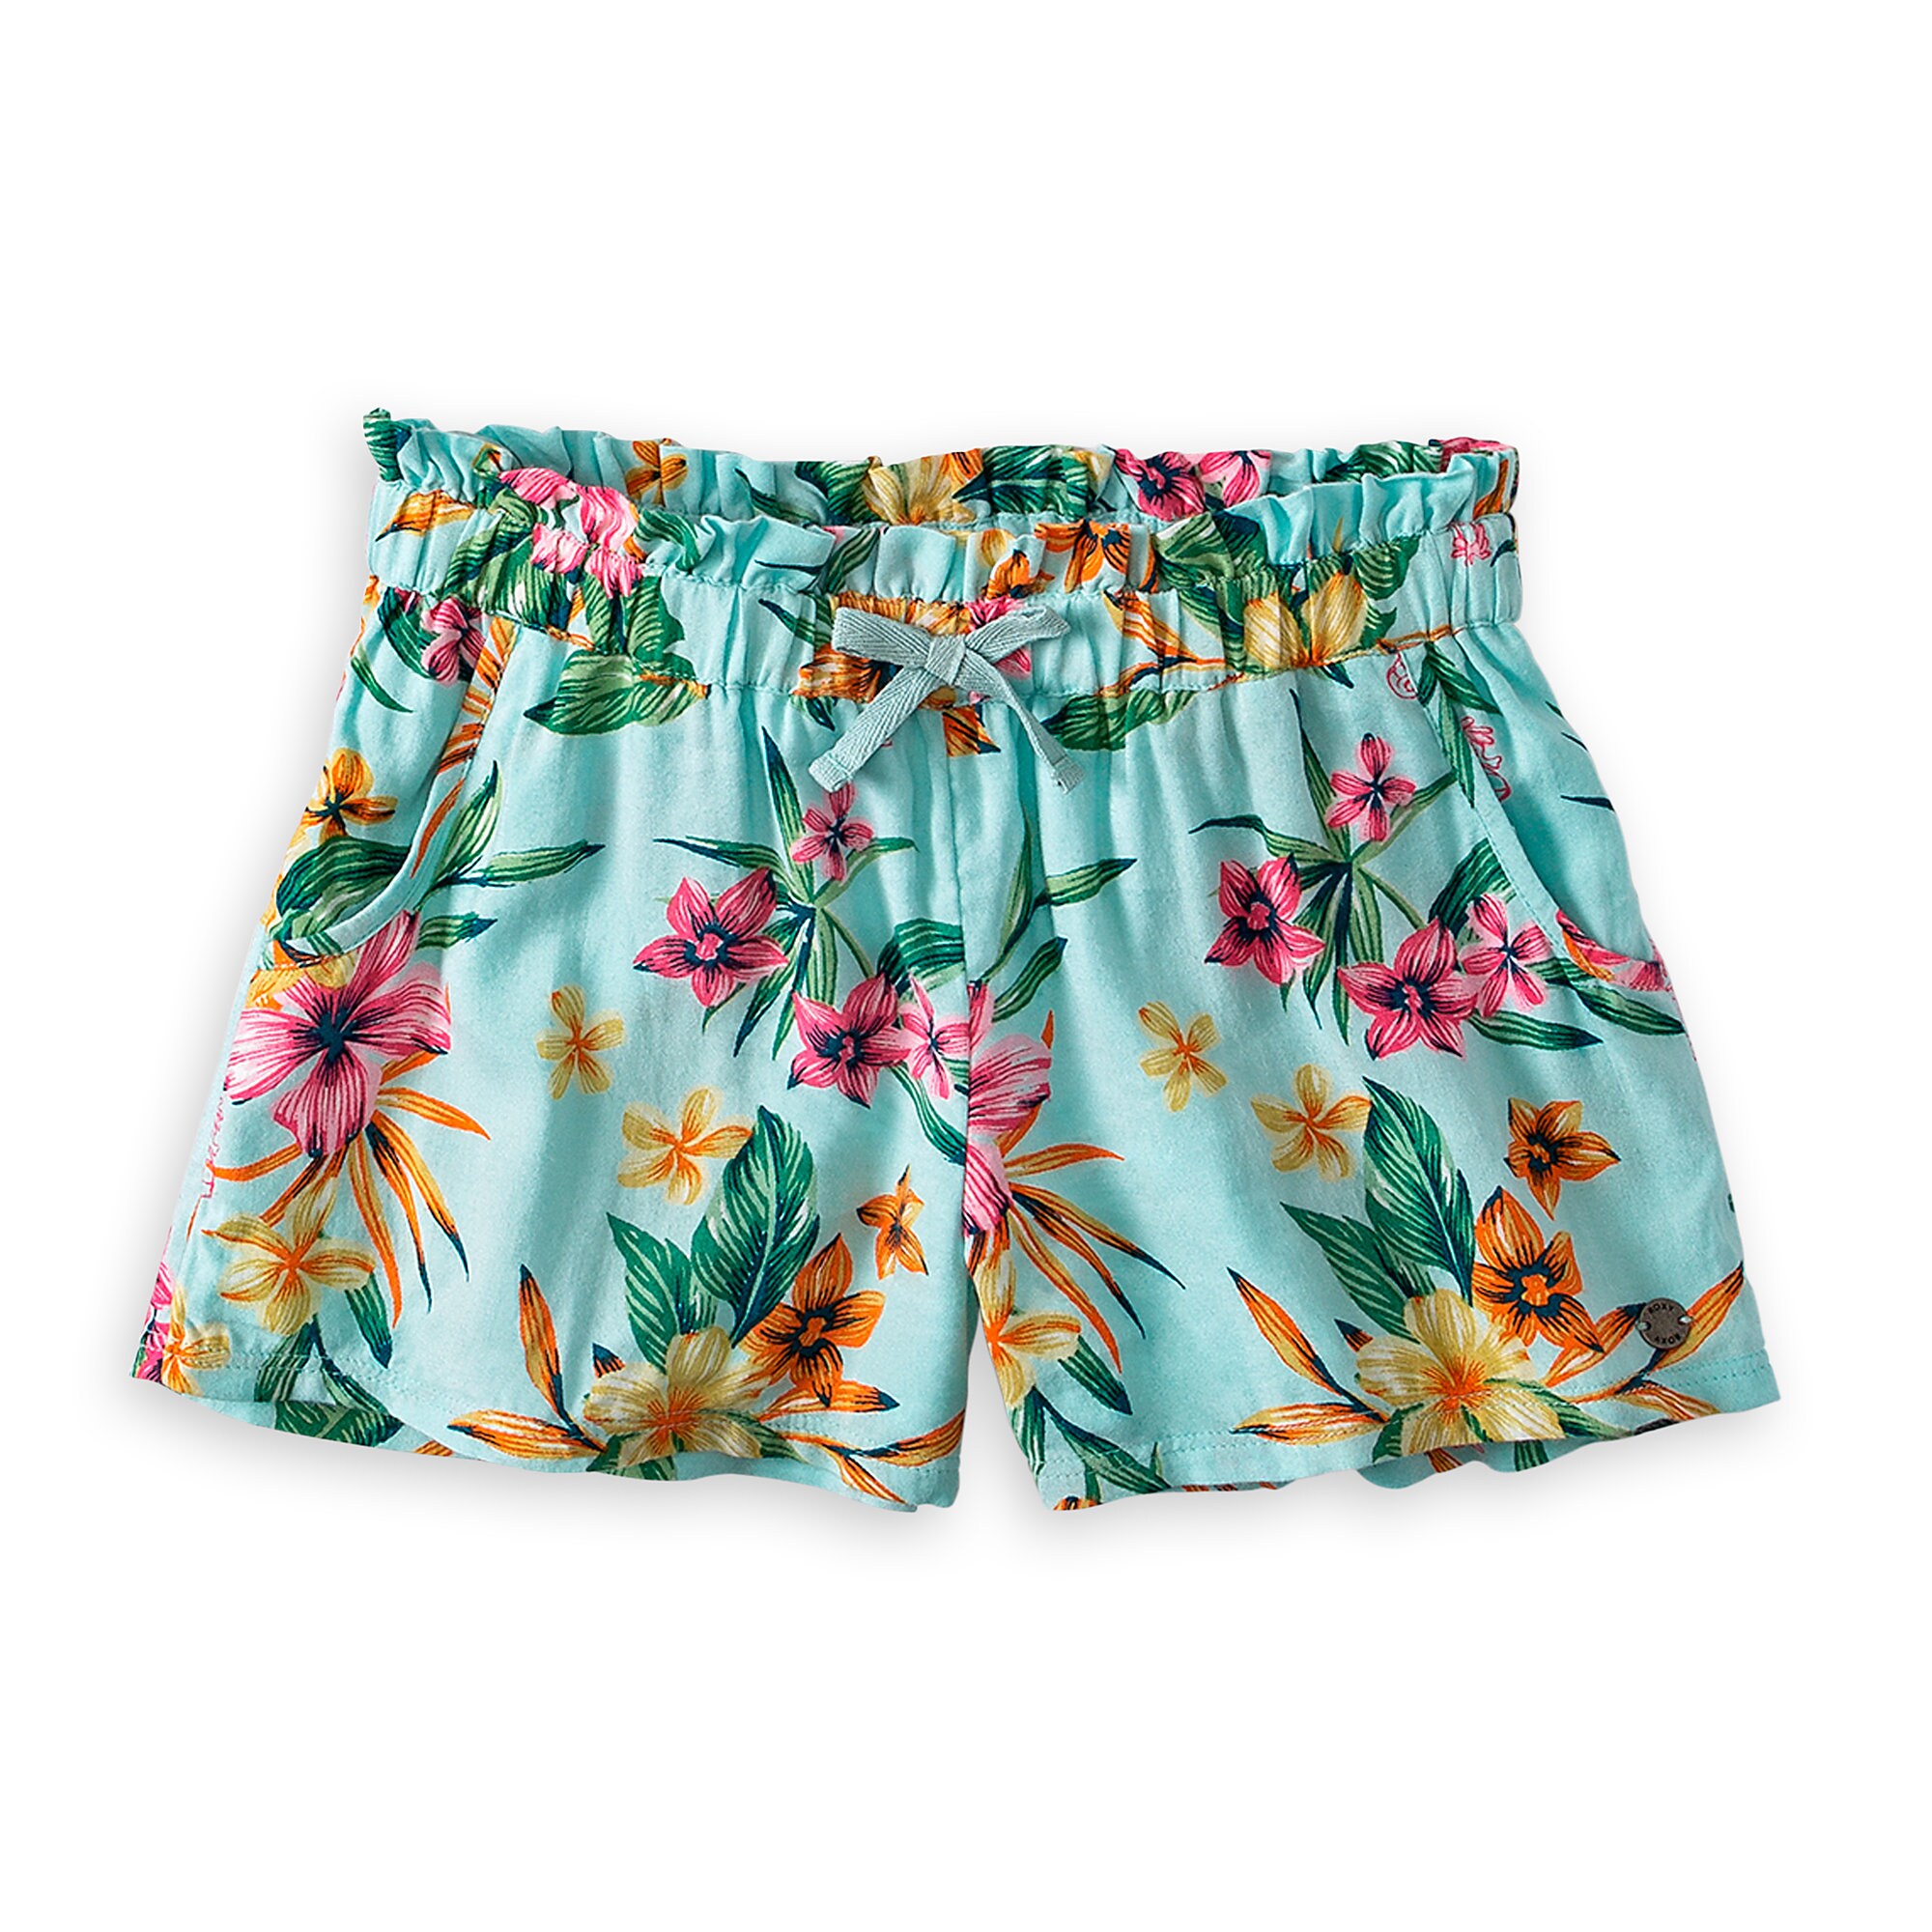 The Little Mermaid Shorts for Girls by ROXY Girl